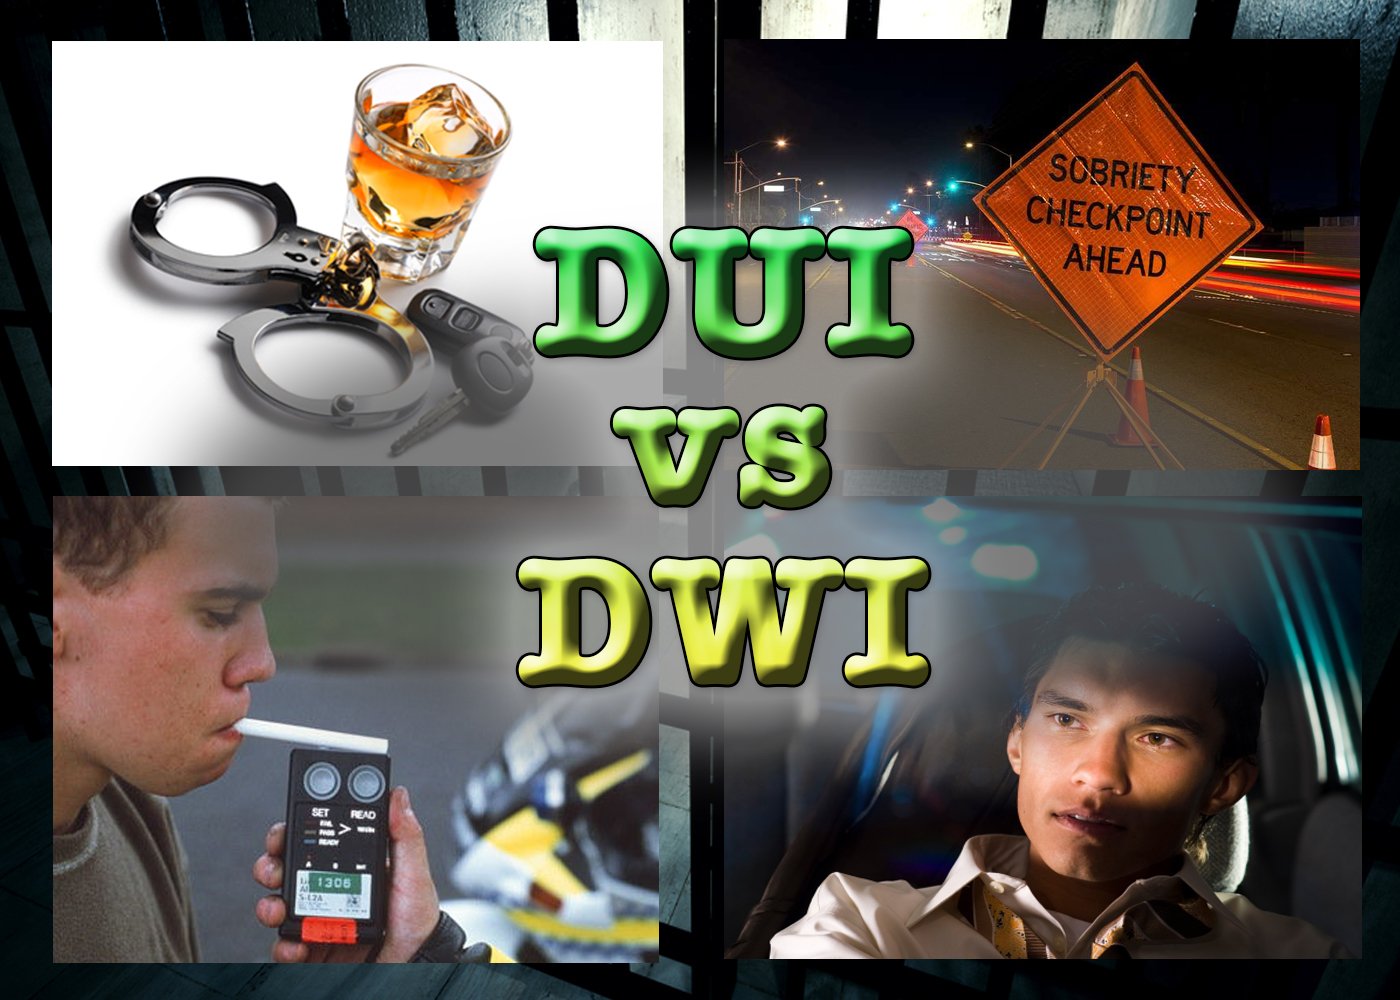 Composite of multiple DUI-related images, handcuffs and a glass of liquor, an orange DUI checkpoint road sign, a young latino man taking a preliminary screening roadside breathalyzer test, a young latino man being pulled over by police while driving a car, overlaying the images is text that says "DUI vs DWI"